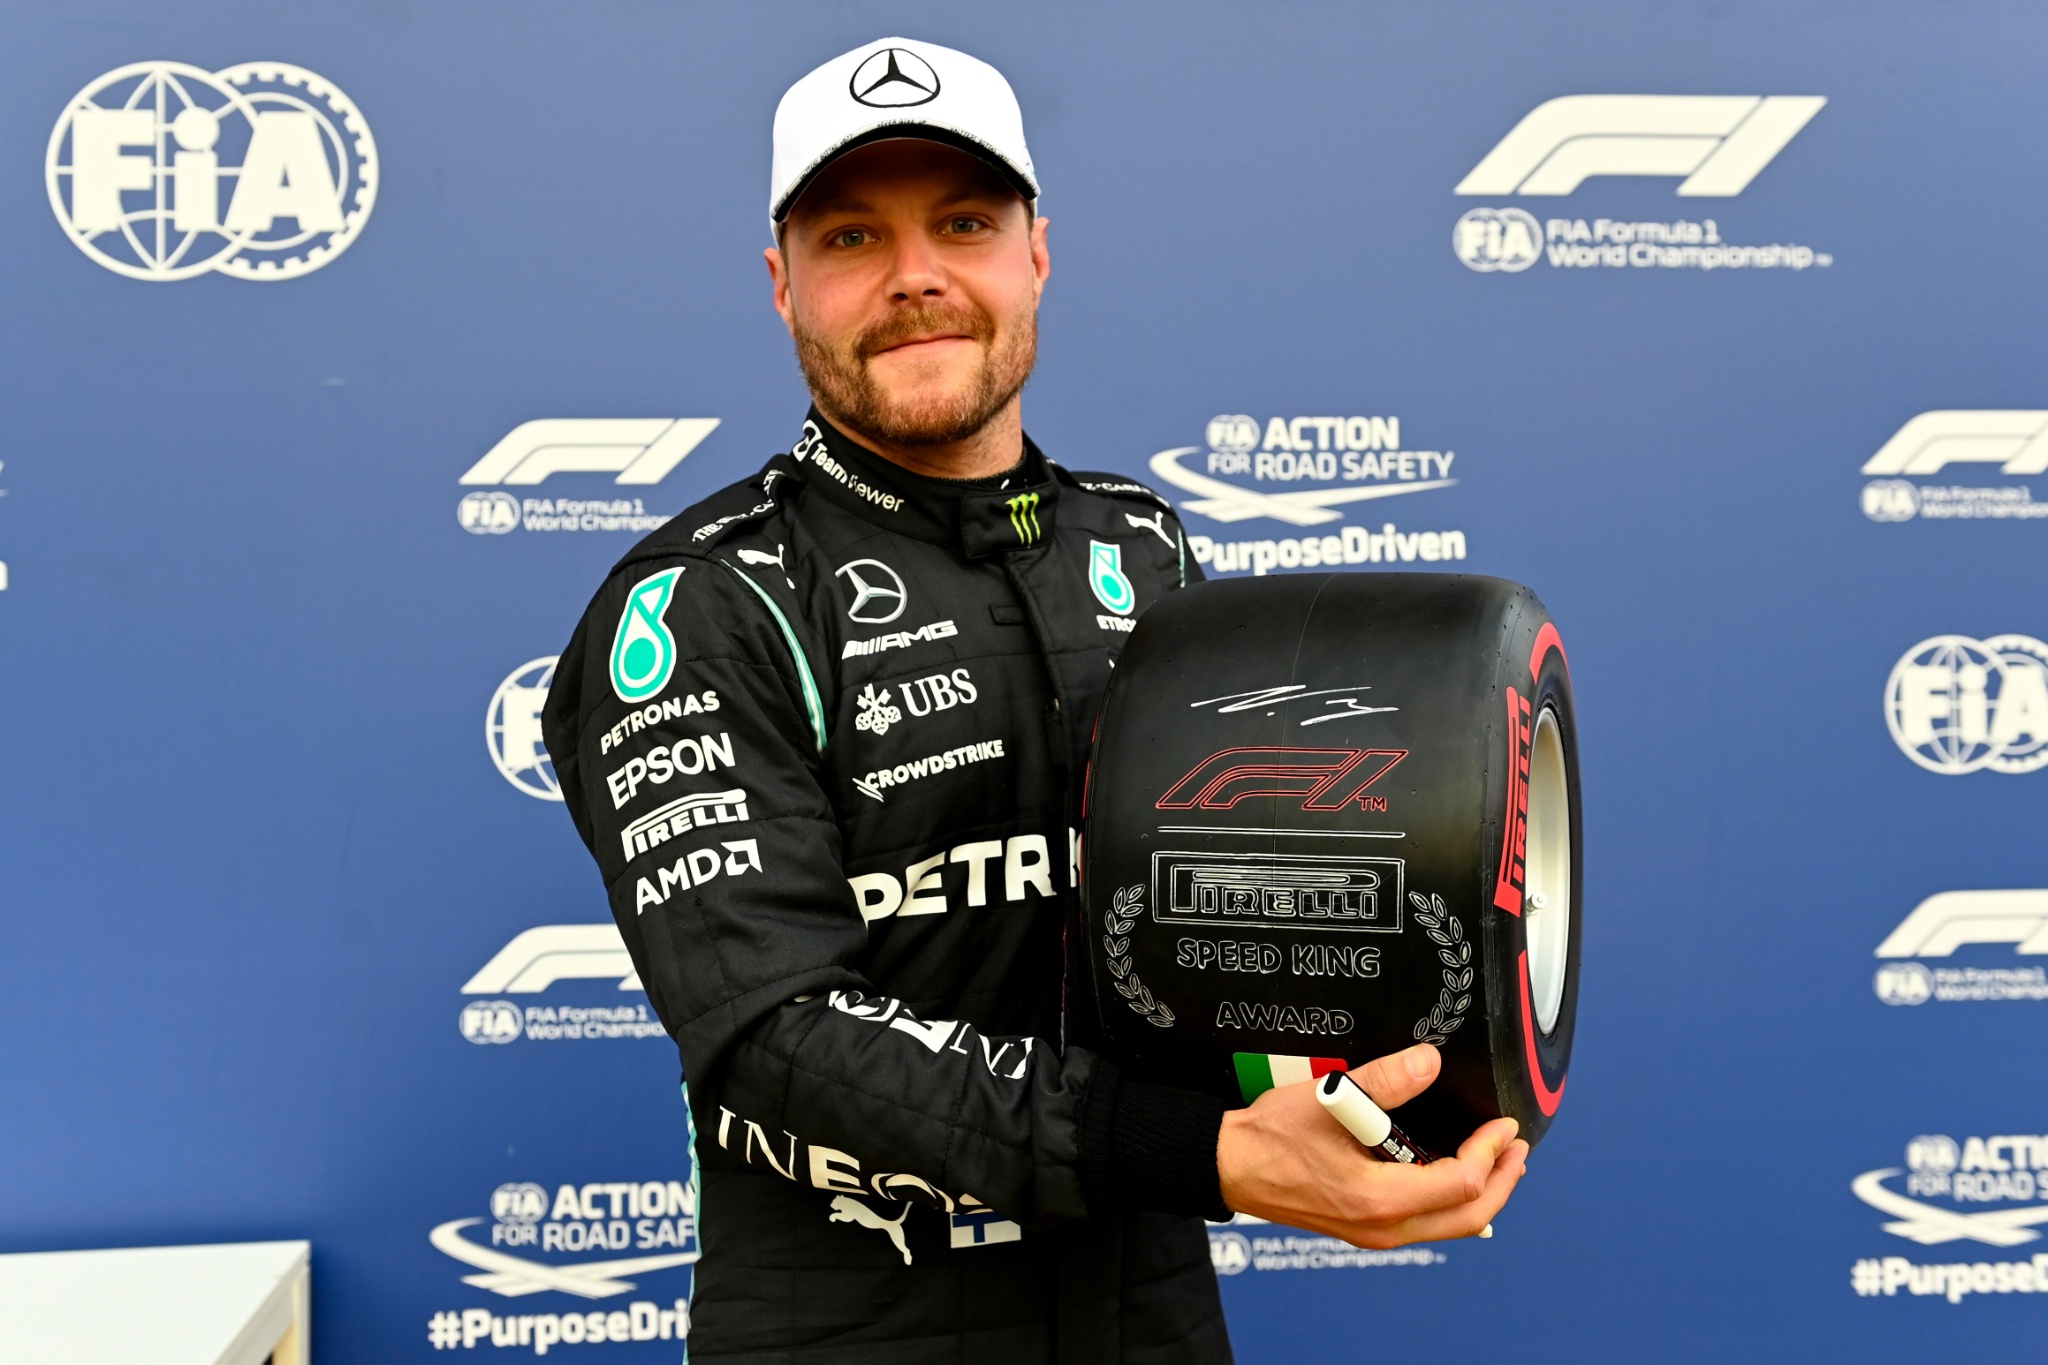 Valtteri Bottas (FIN) Mercedes AMG F1 celebrates being fastest in qualifying parc ferme with the Pirelli Speed King